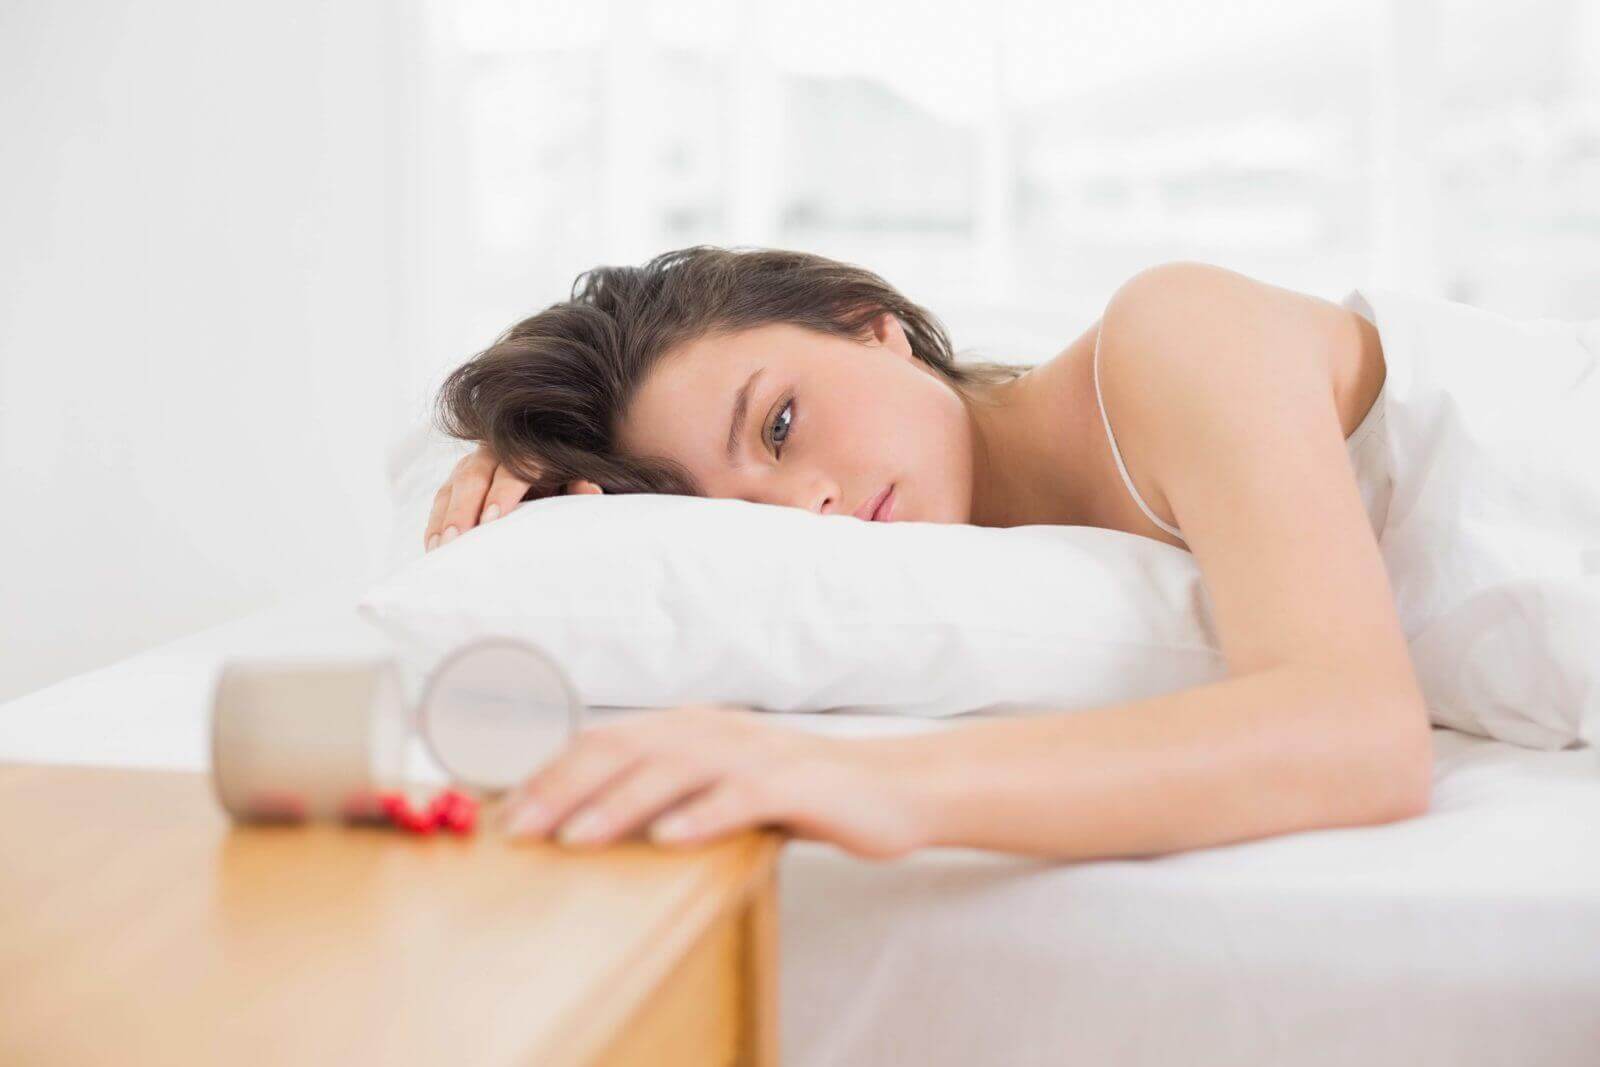 Can You Overdose On Sleeping Pills? [Expert Answered]